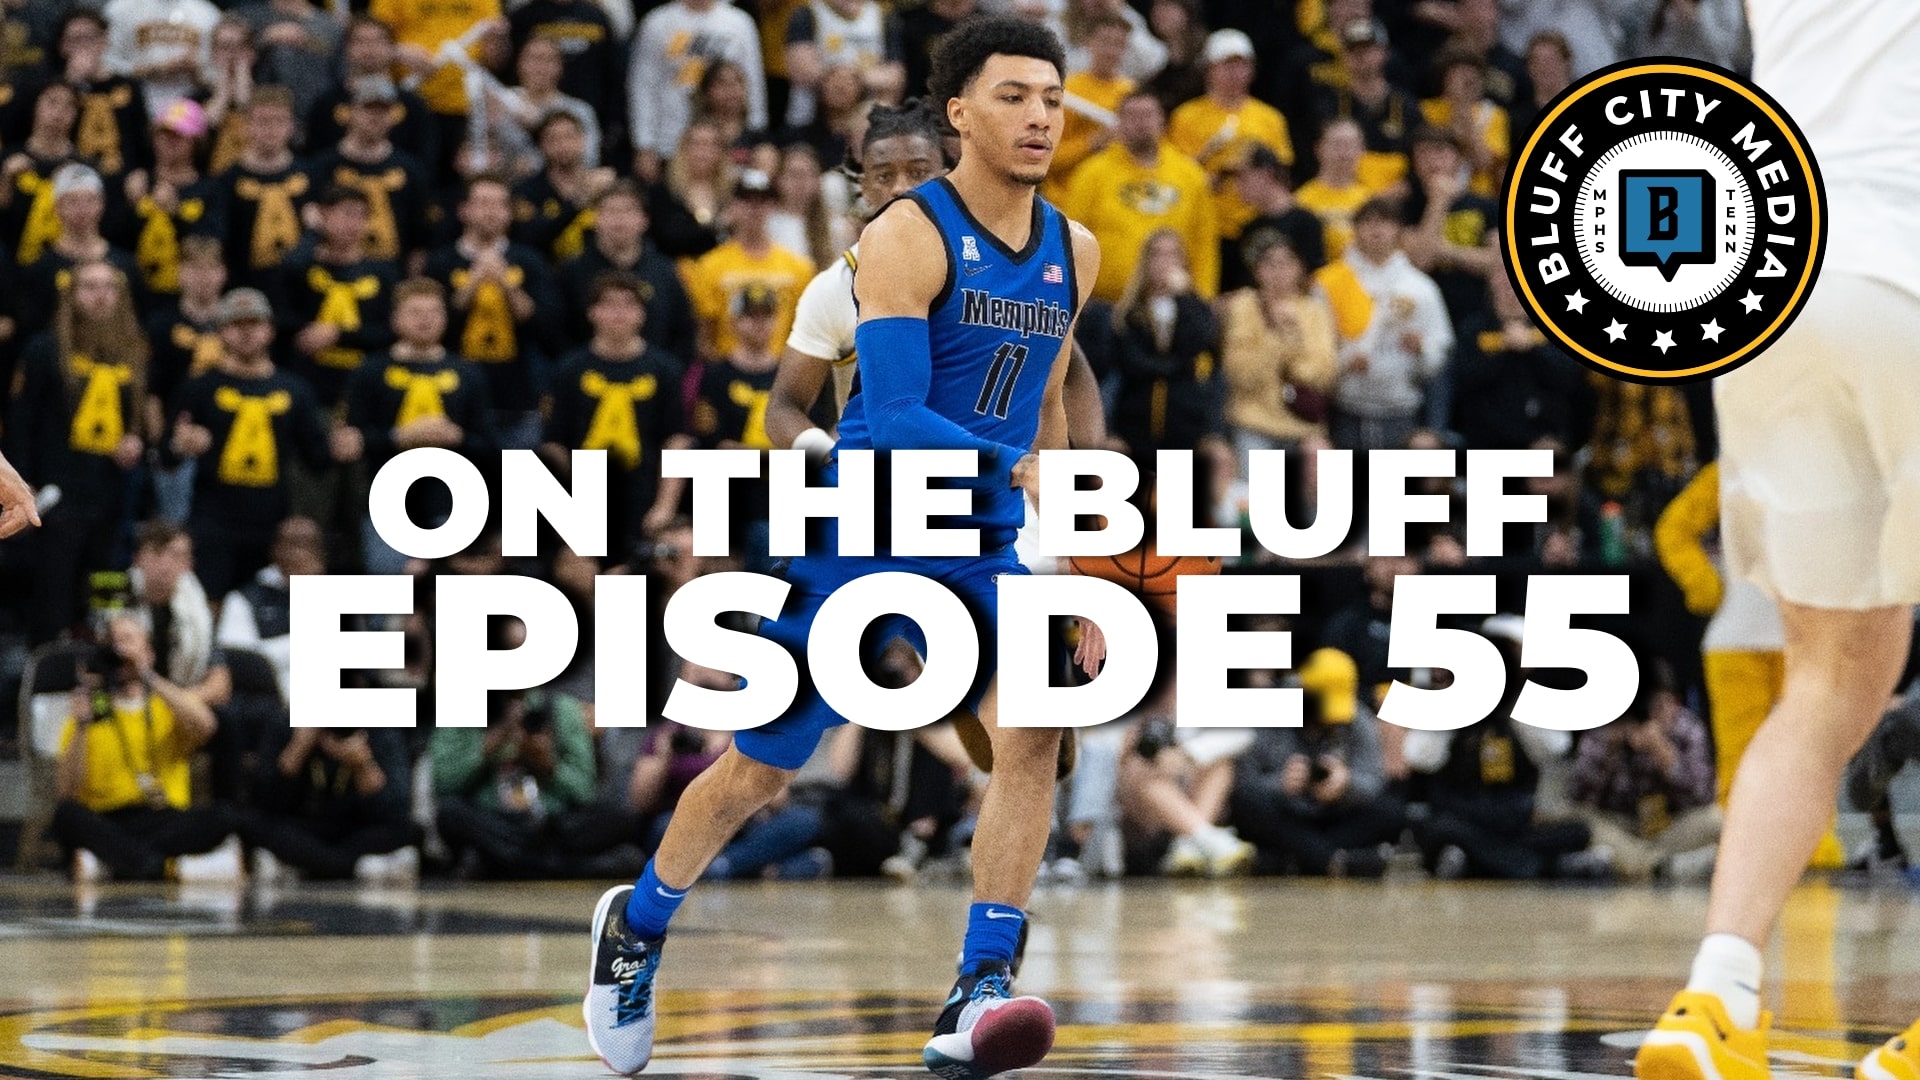 Featured image for “On The Bluff Ep 55: Battle 4 Atlantis Recap; AP Top 25 Snub; Ryan Silverfield’s Post-Game Comments”